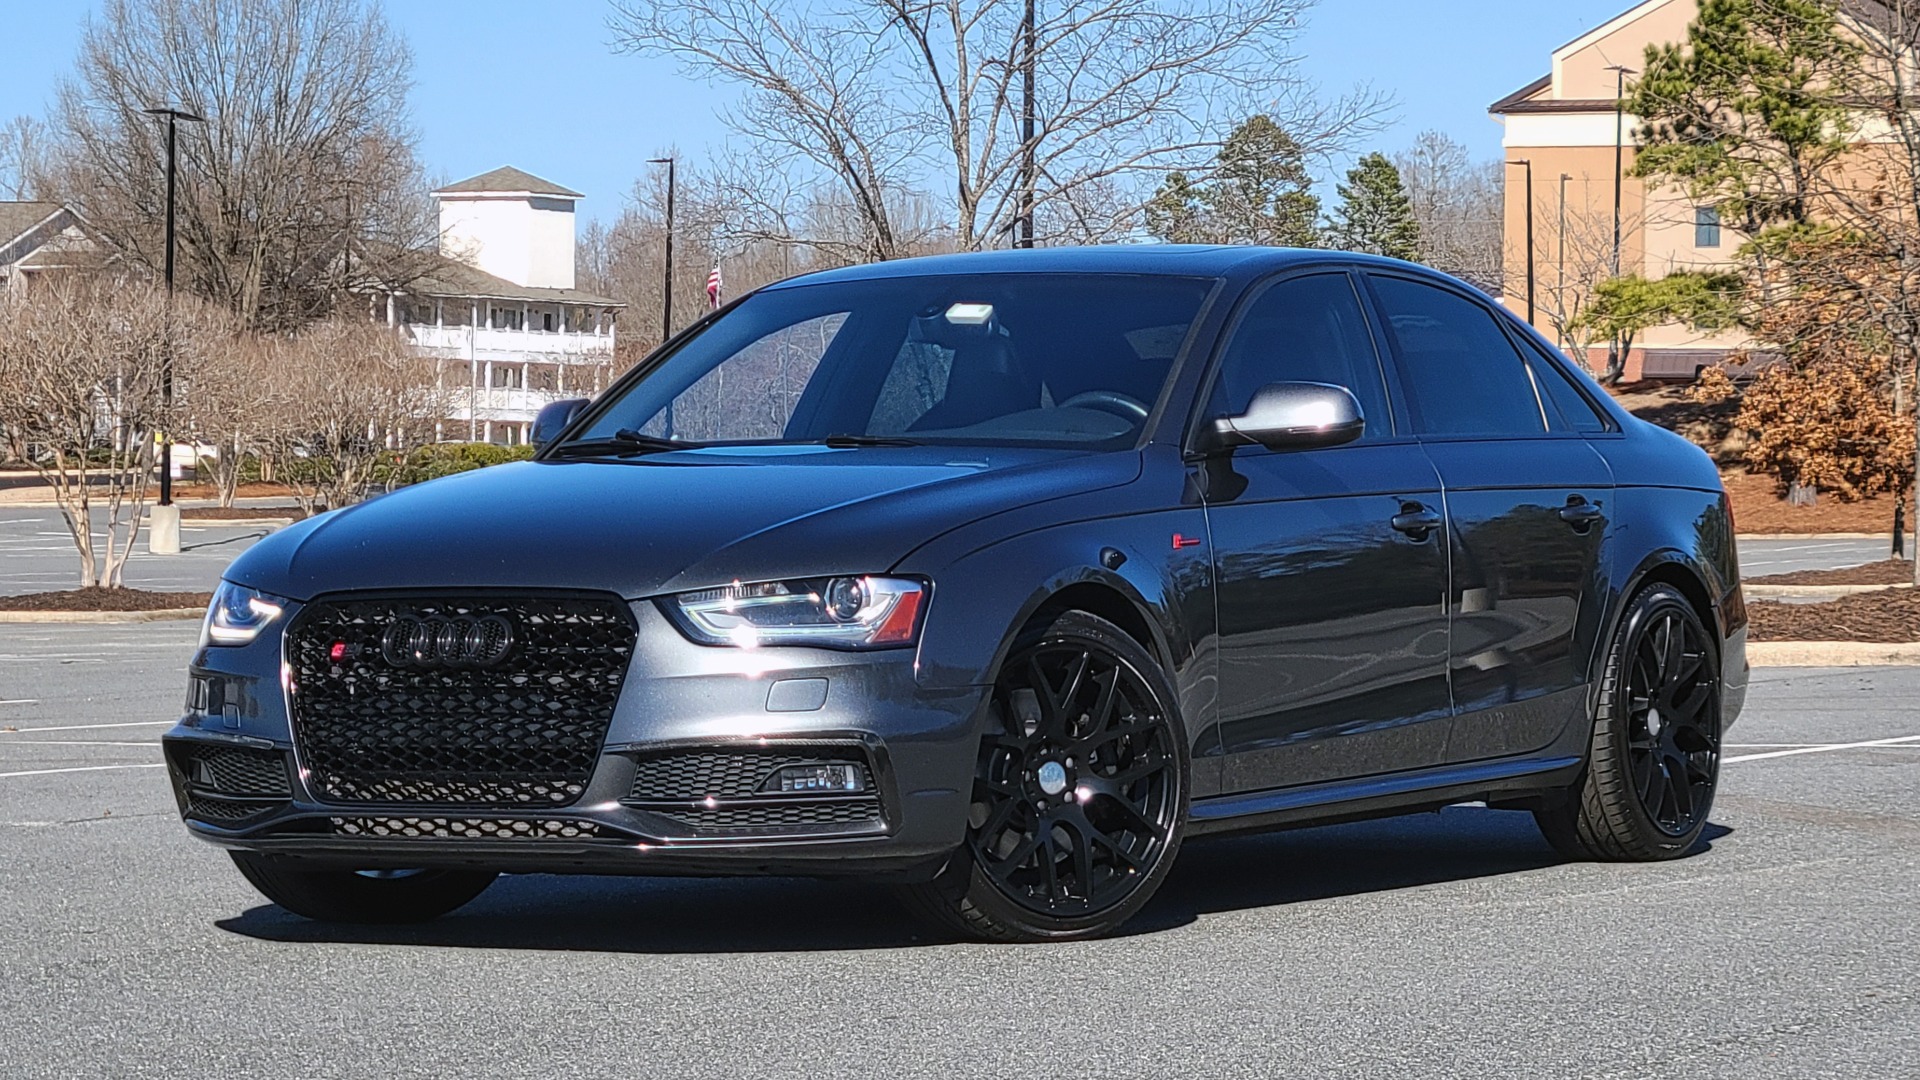 Used 2015 Audi S4 PREMIUM PLUS / TECH PKG / NAV / B&O SOUND / PARK SYS W/REARVIEW for sale Sold at Formula Imports in Charlotte NC 28227 1